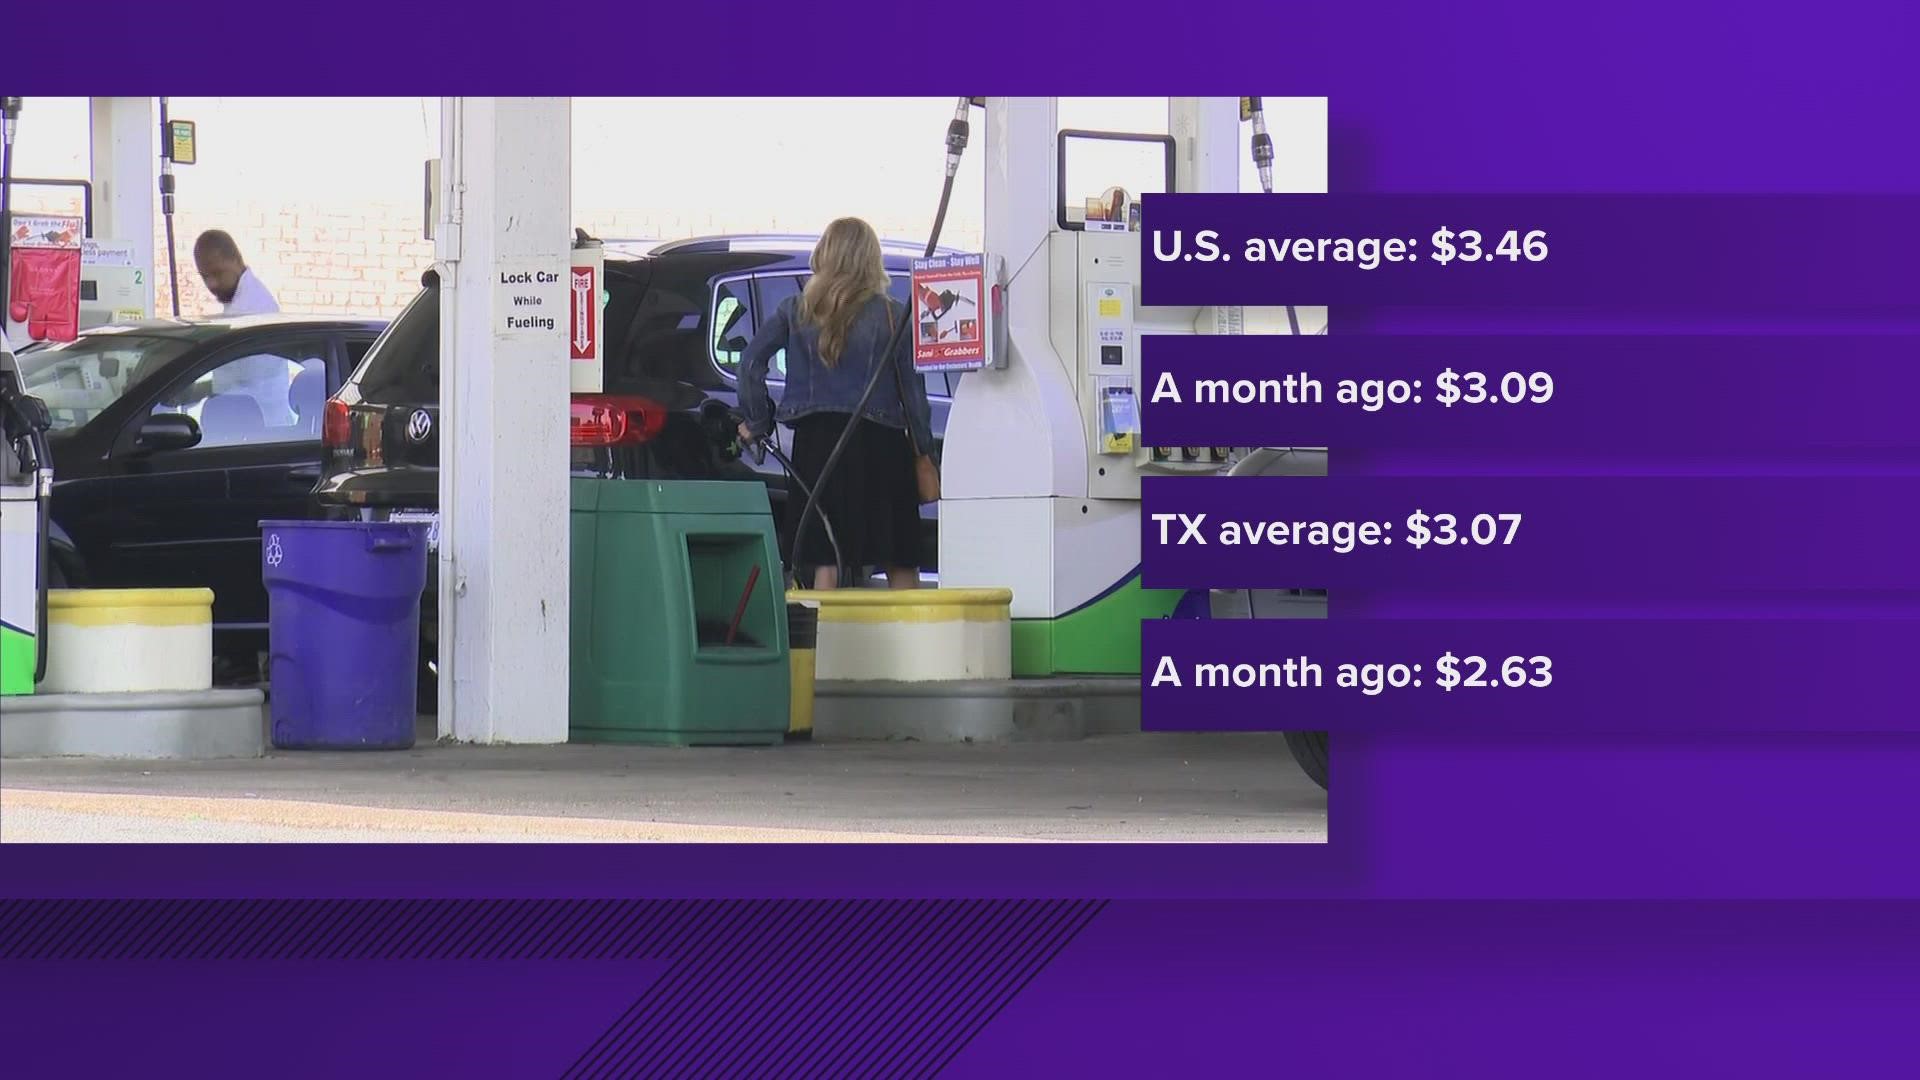 The average price in Texas sits at about $3.07.